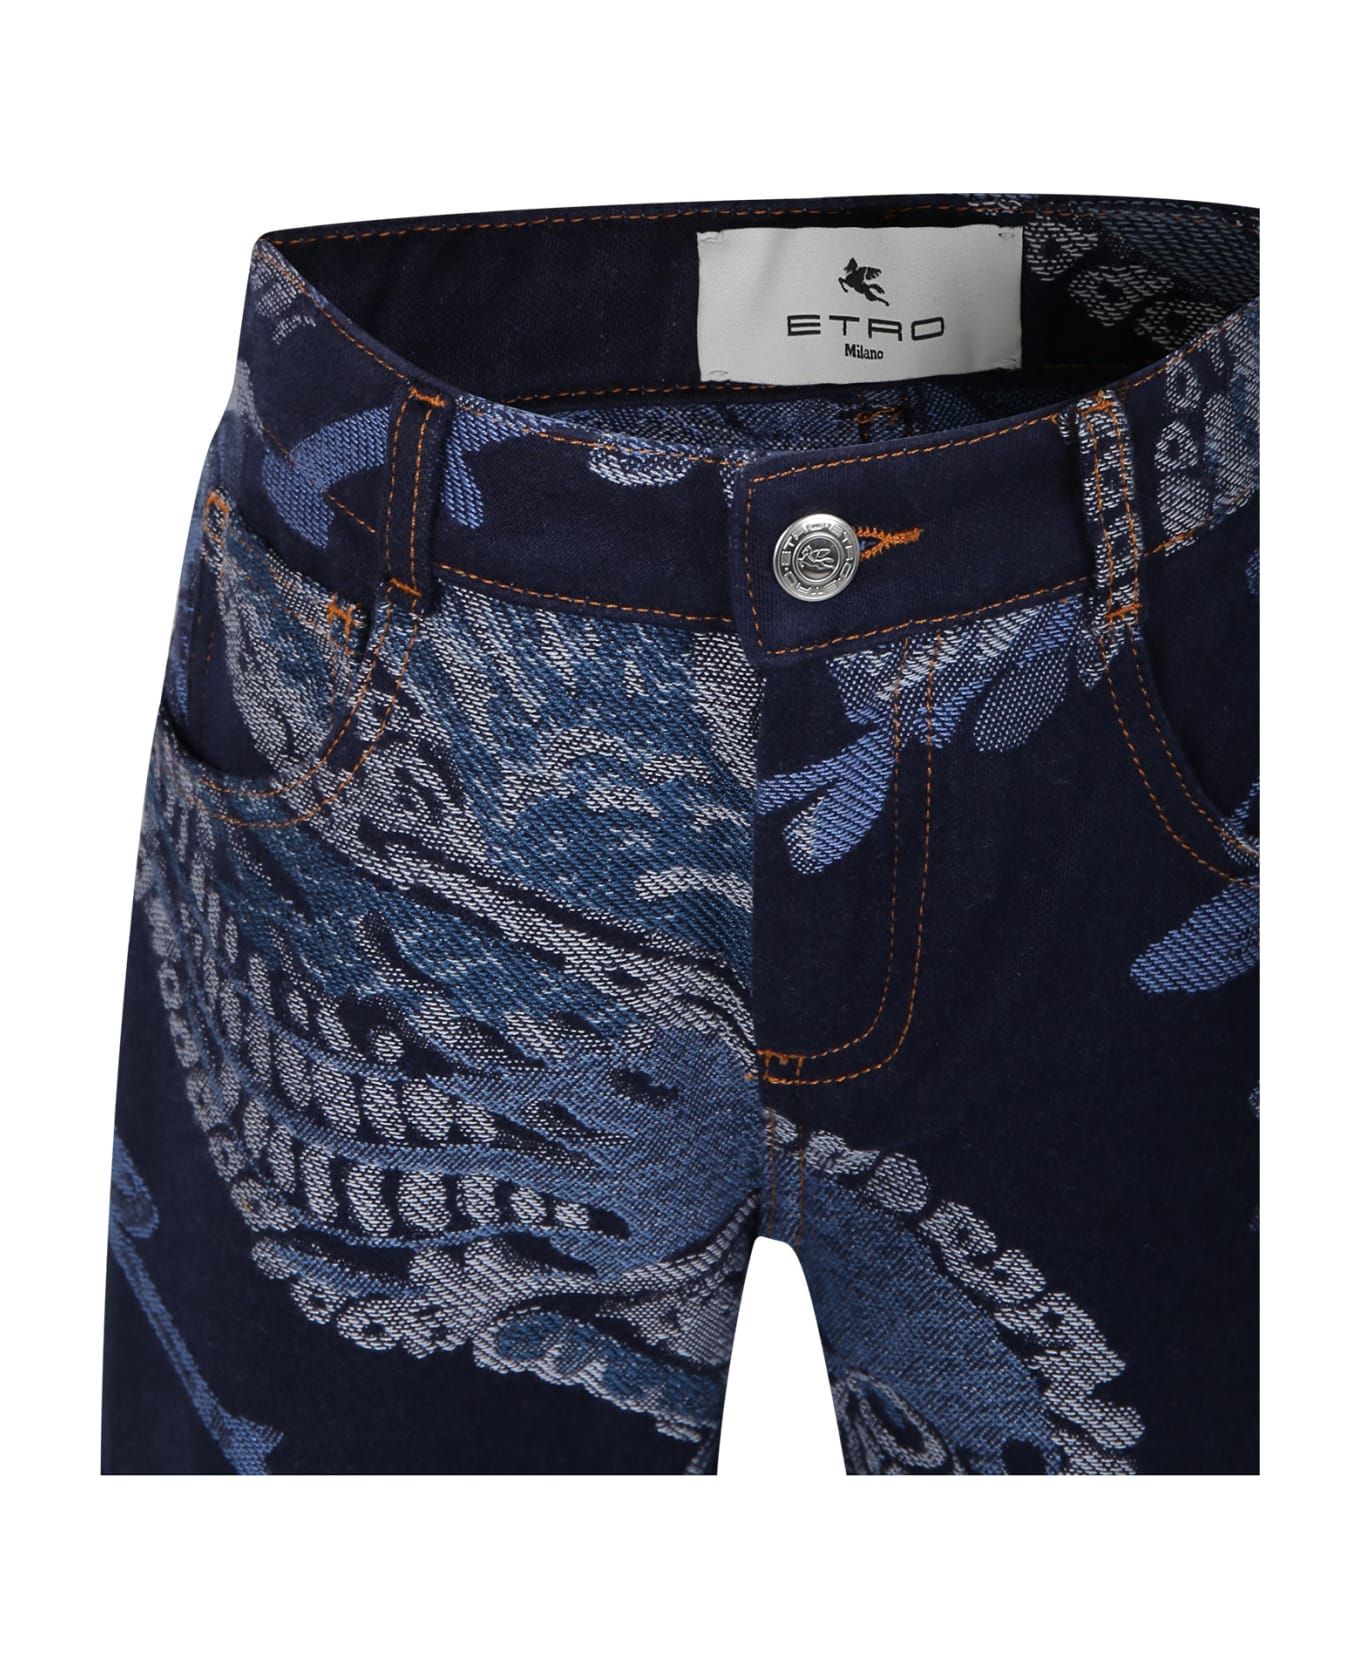 Etro Denim Jeans For Kids With Paisley Pattern - Denim ボトムス